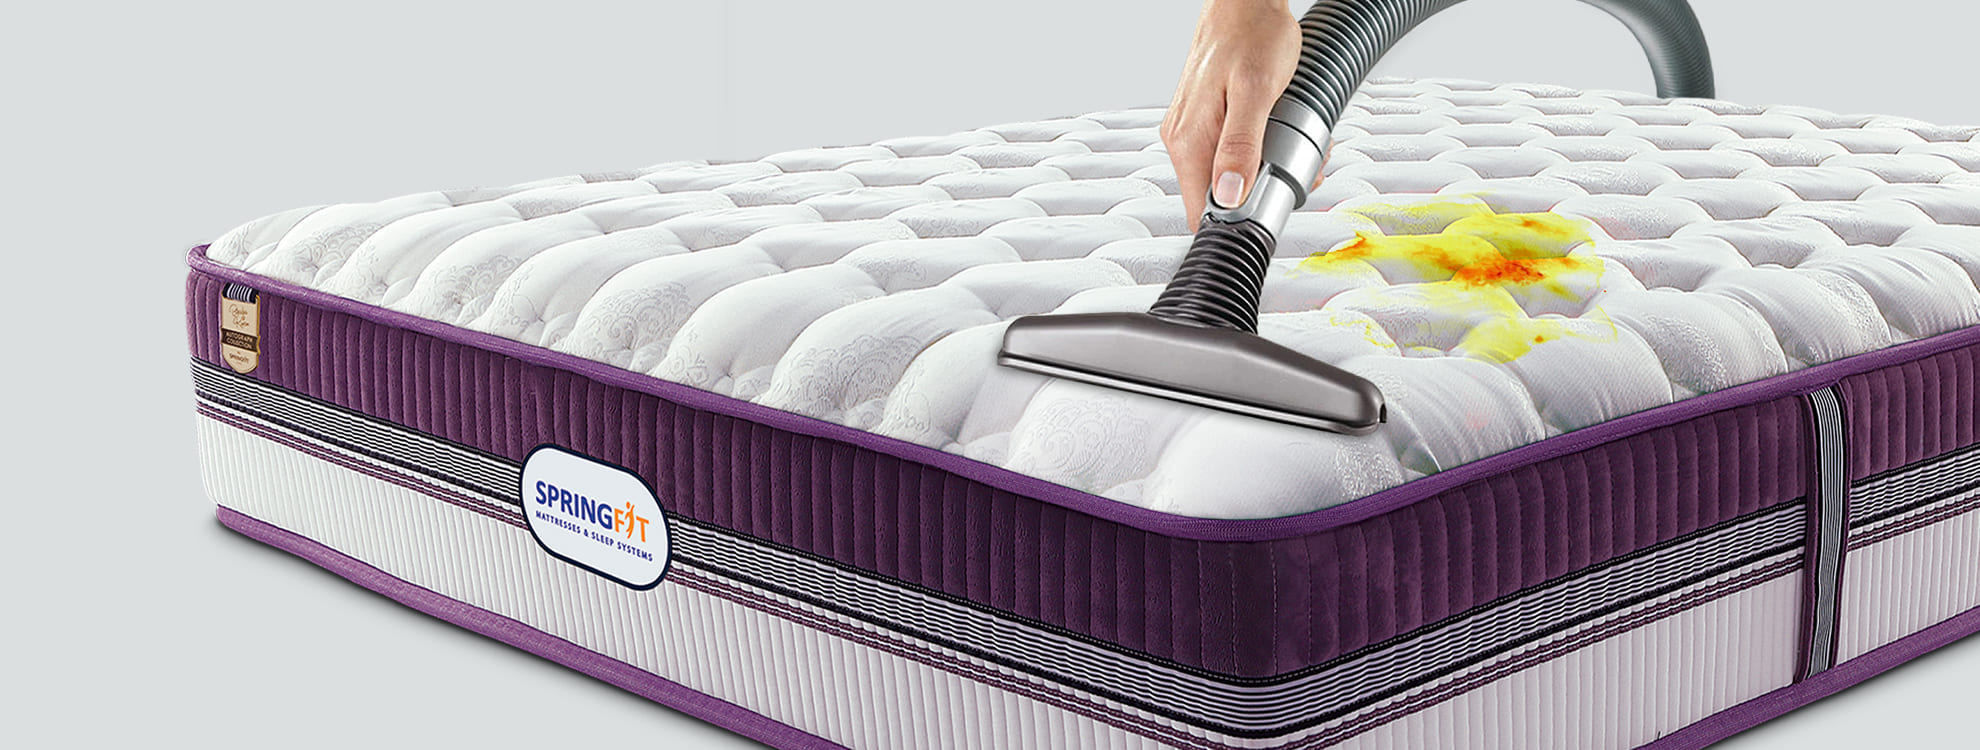 Mattress Clean And Hygienic